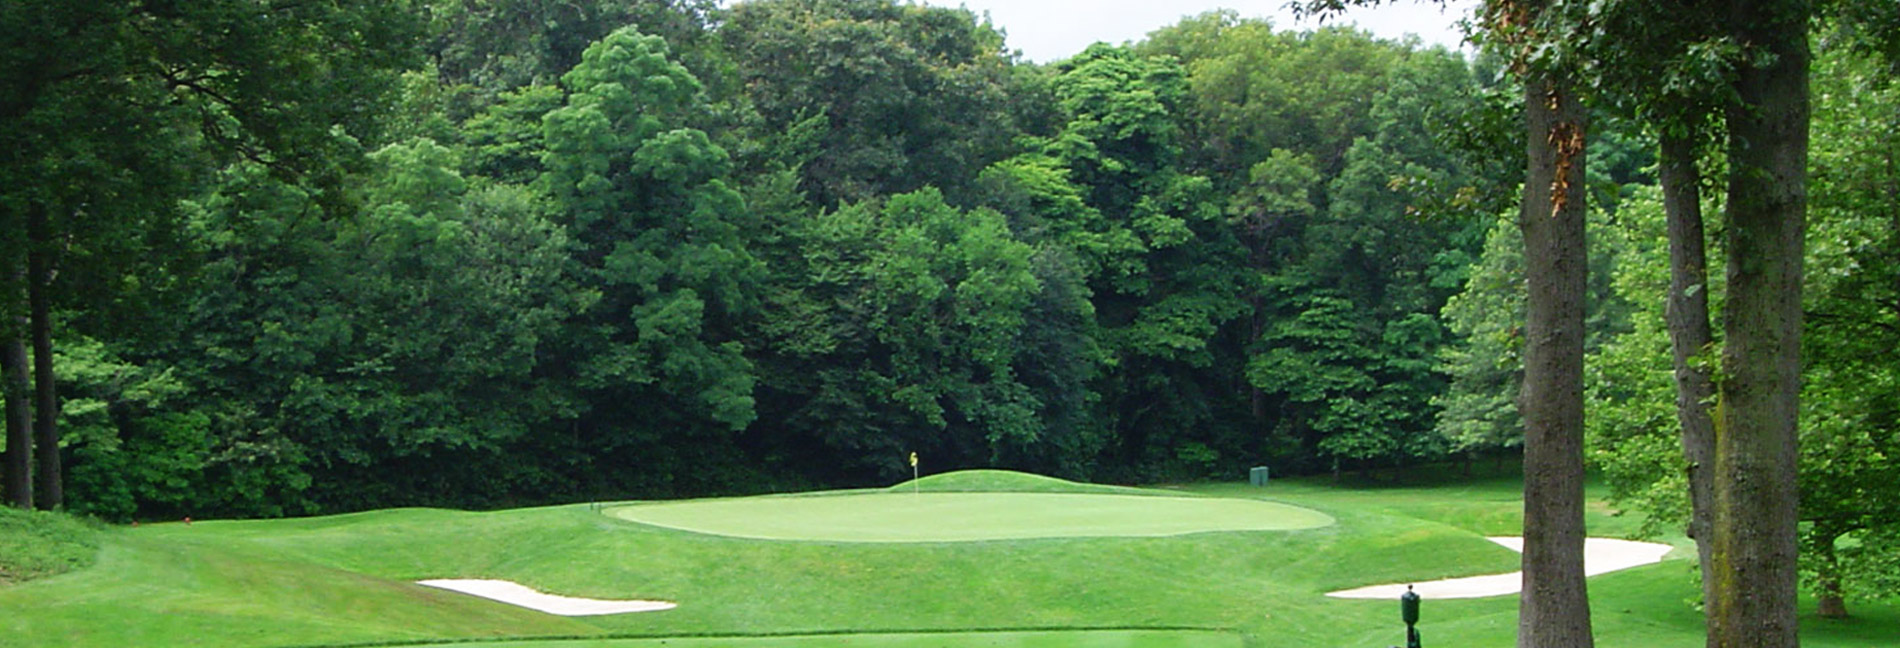 Image of Cold Spring Country Club's Golf Course